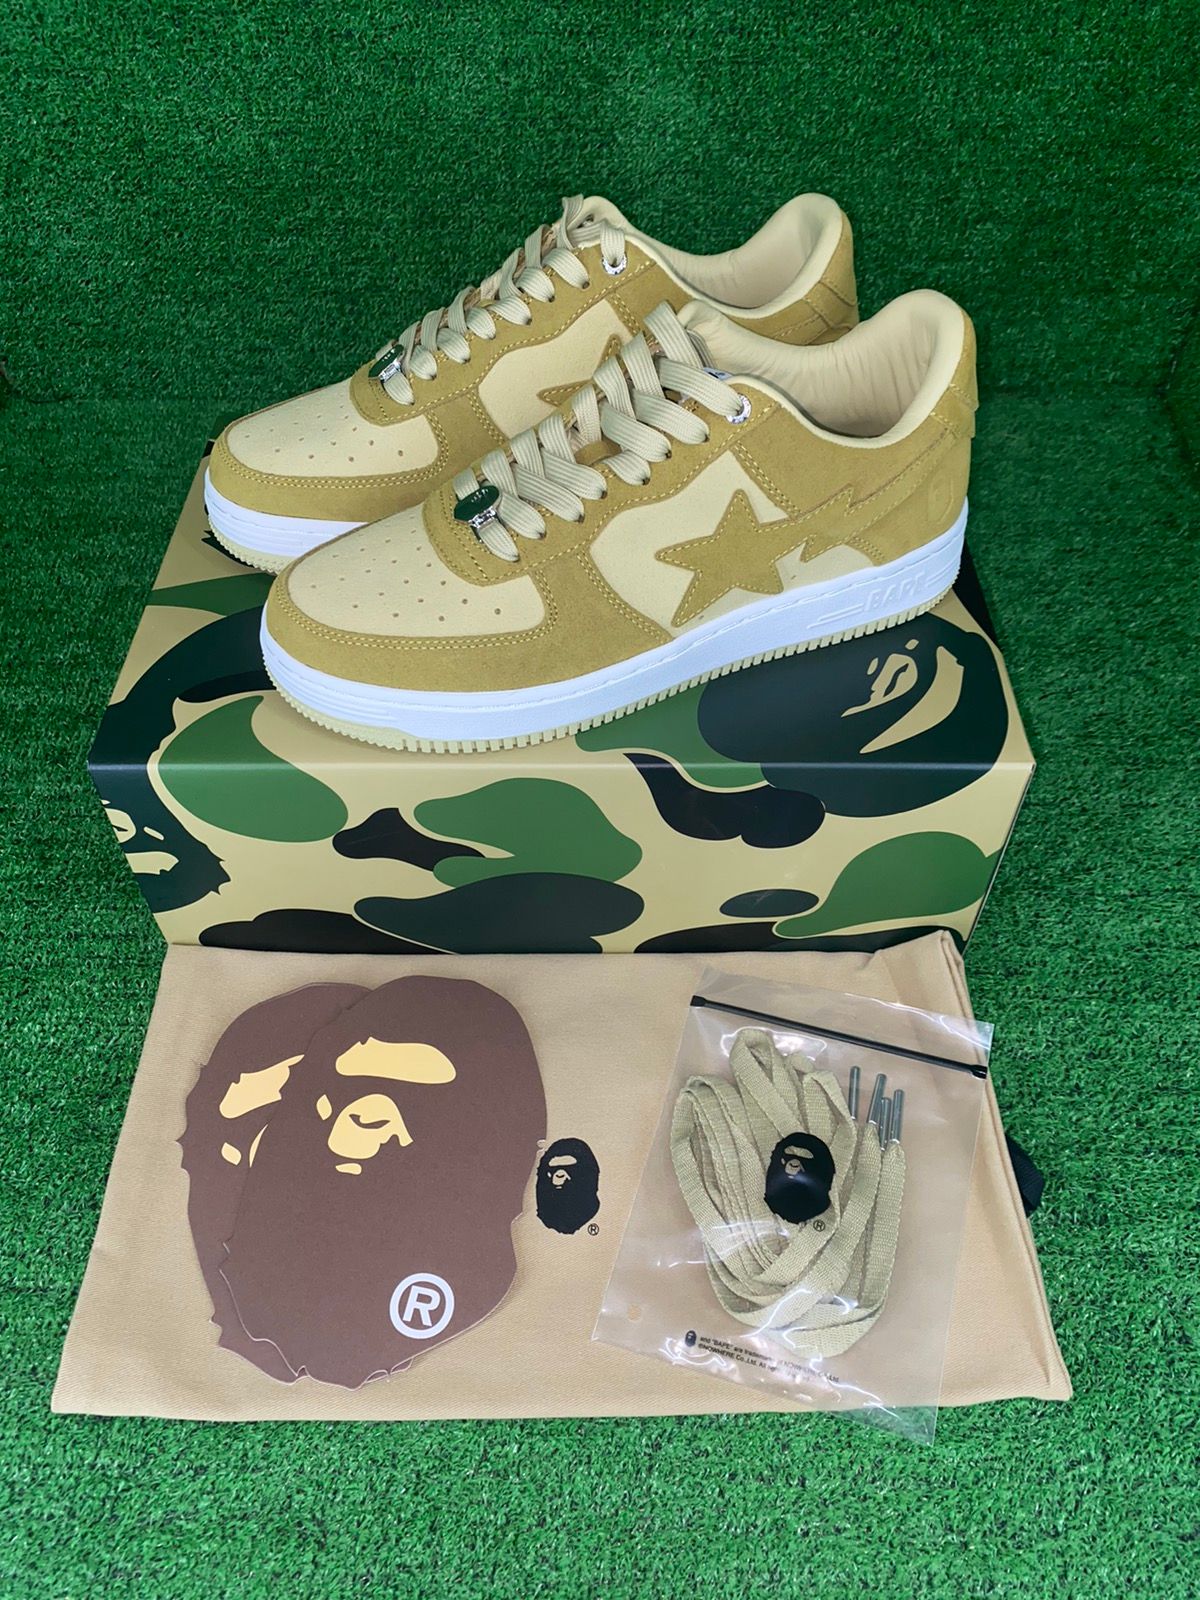 Pre-owned Bape Sta 3 Suede Beige Size 9.5 Shoes